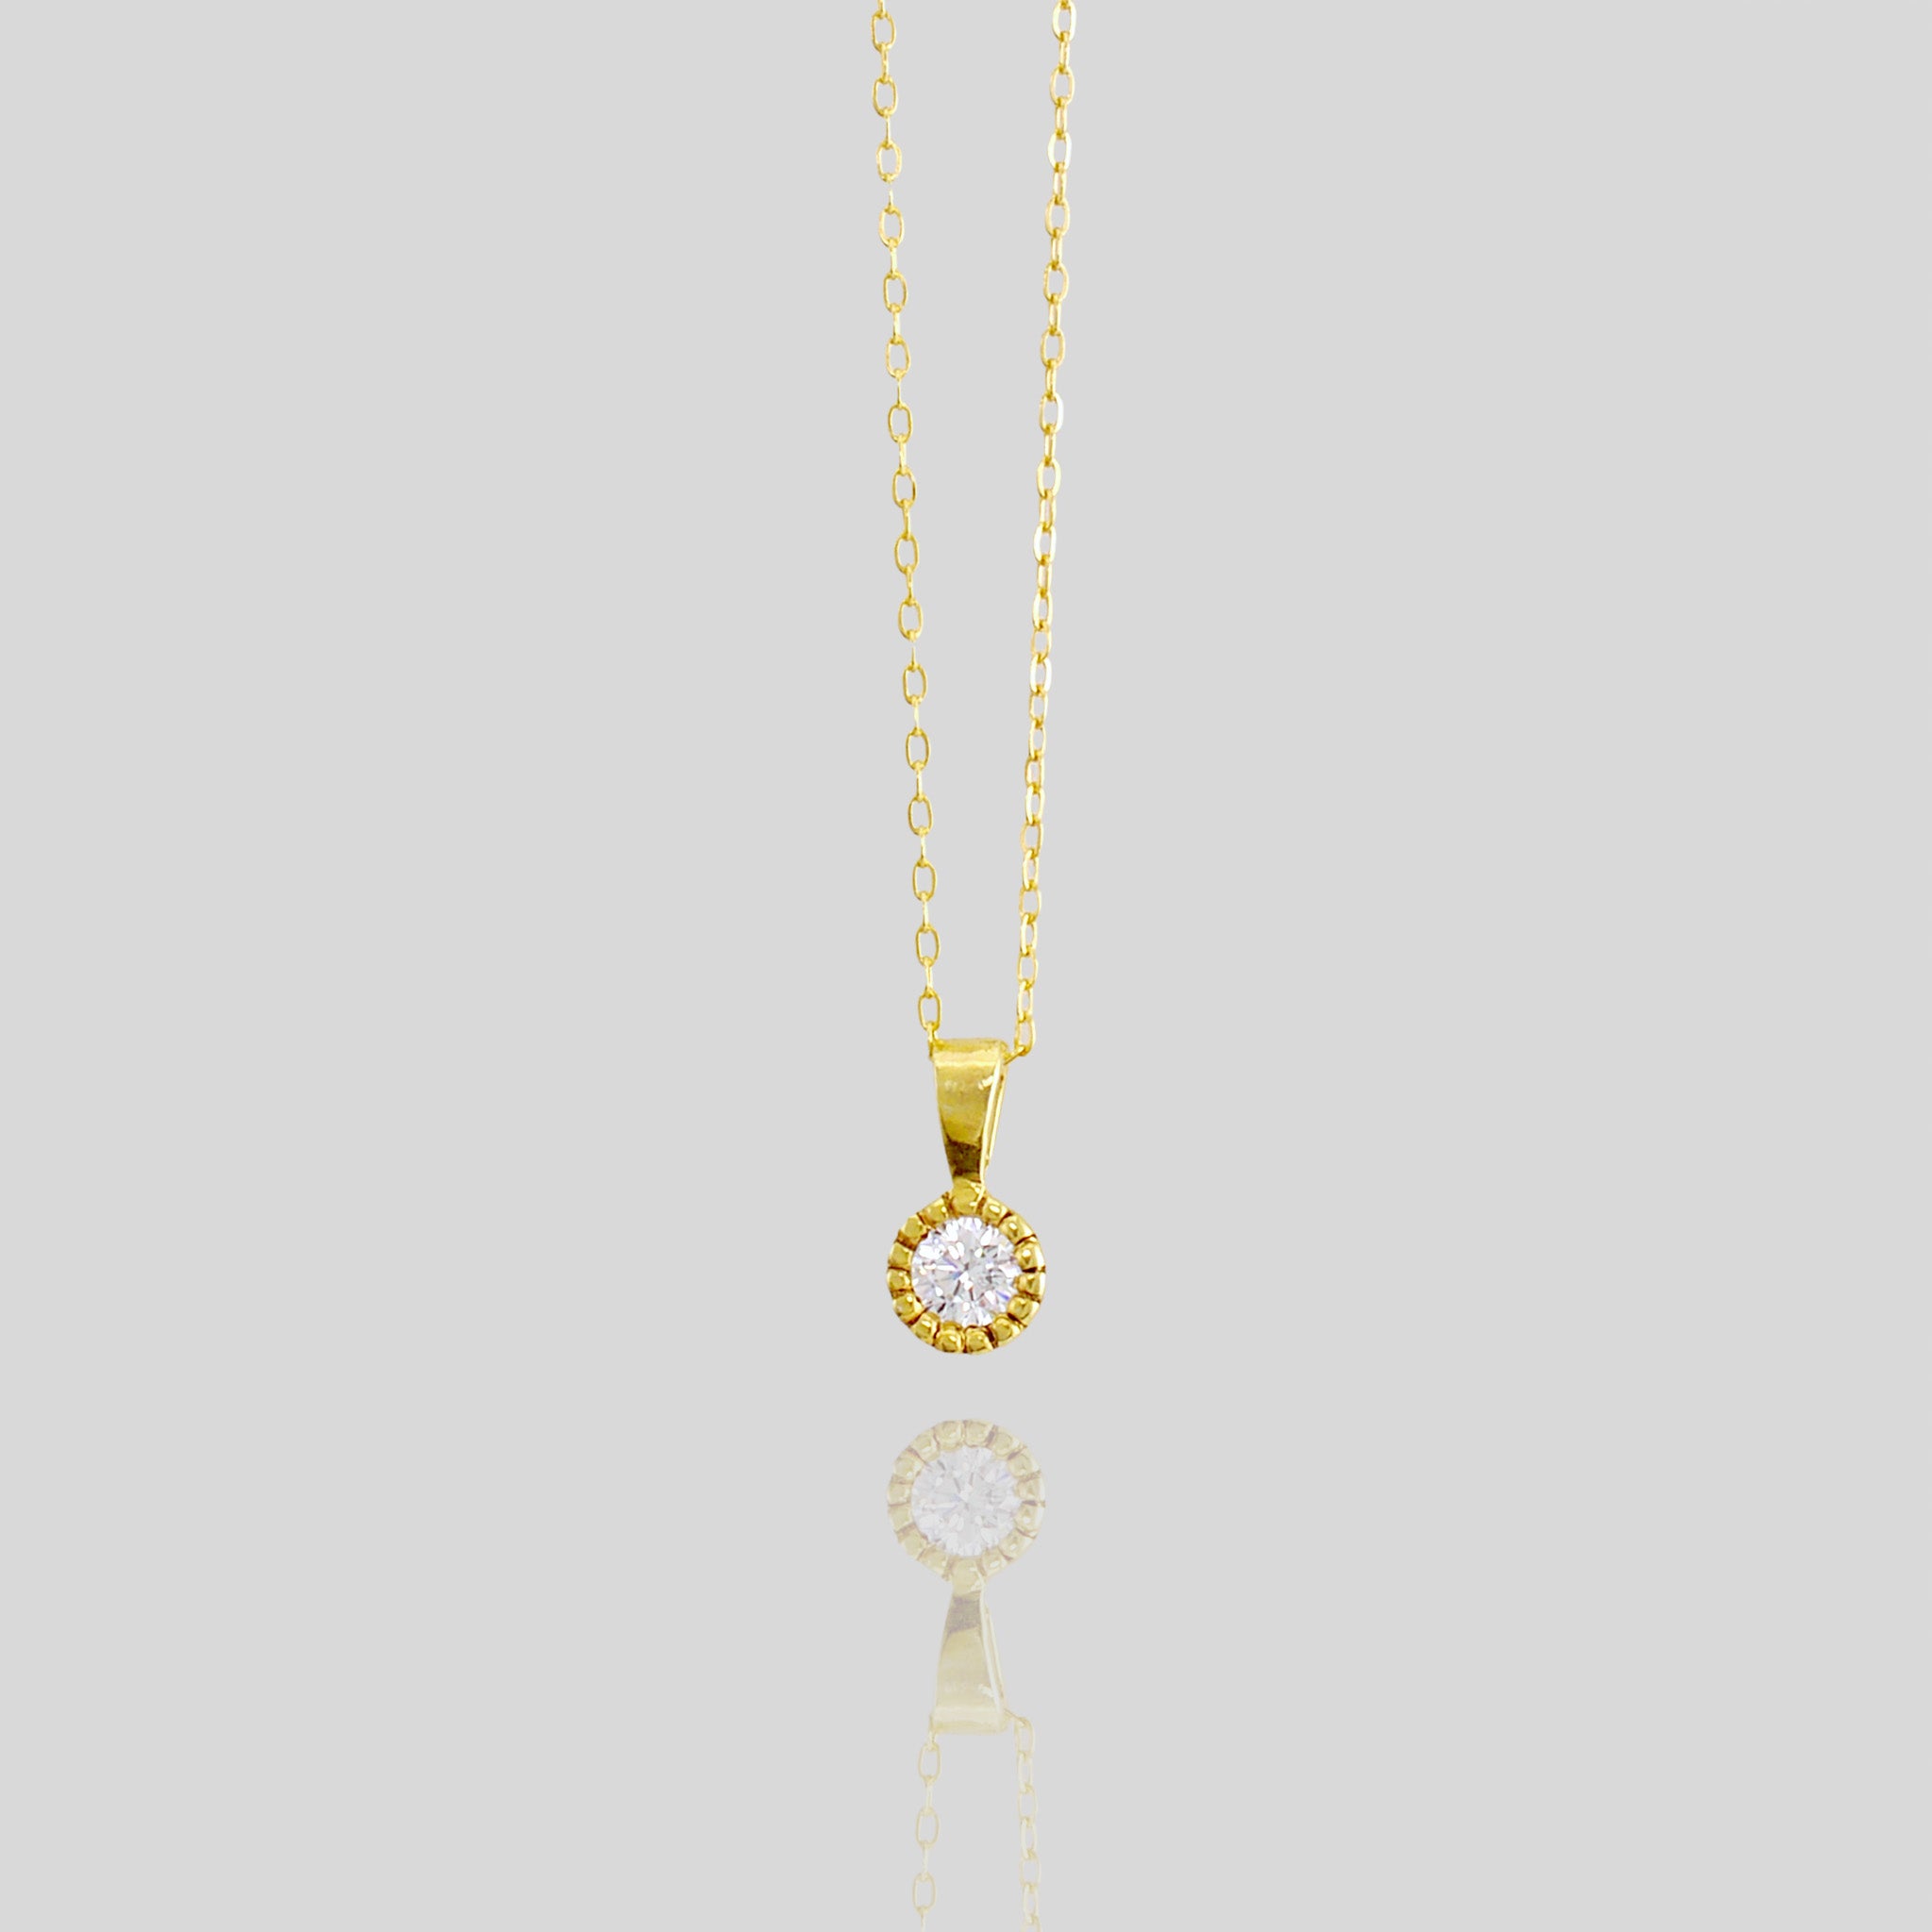 Close up of an Elegant round gold pendant with embroidered texture and central diamond, exuding classic sophistication.